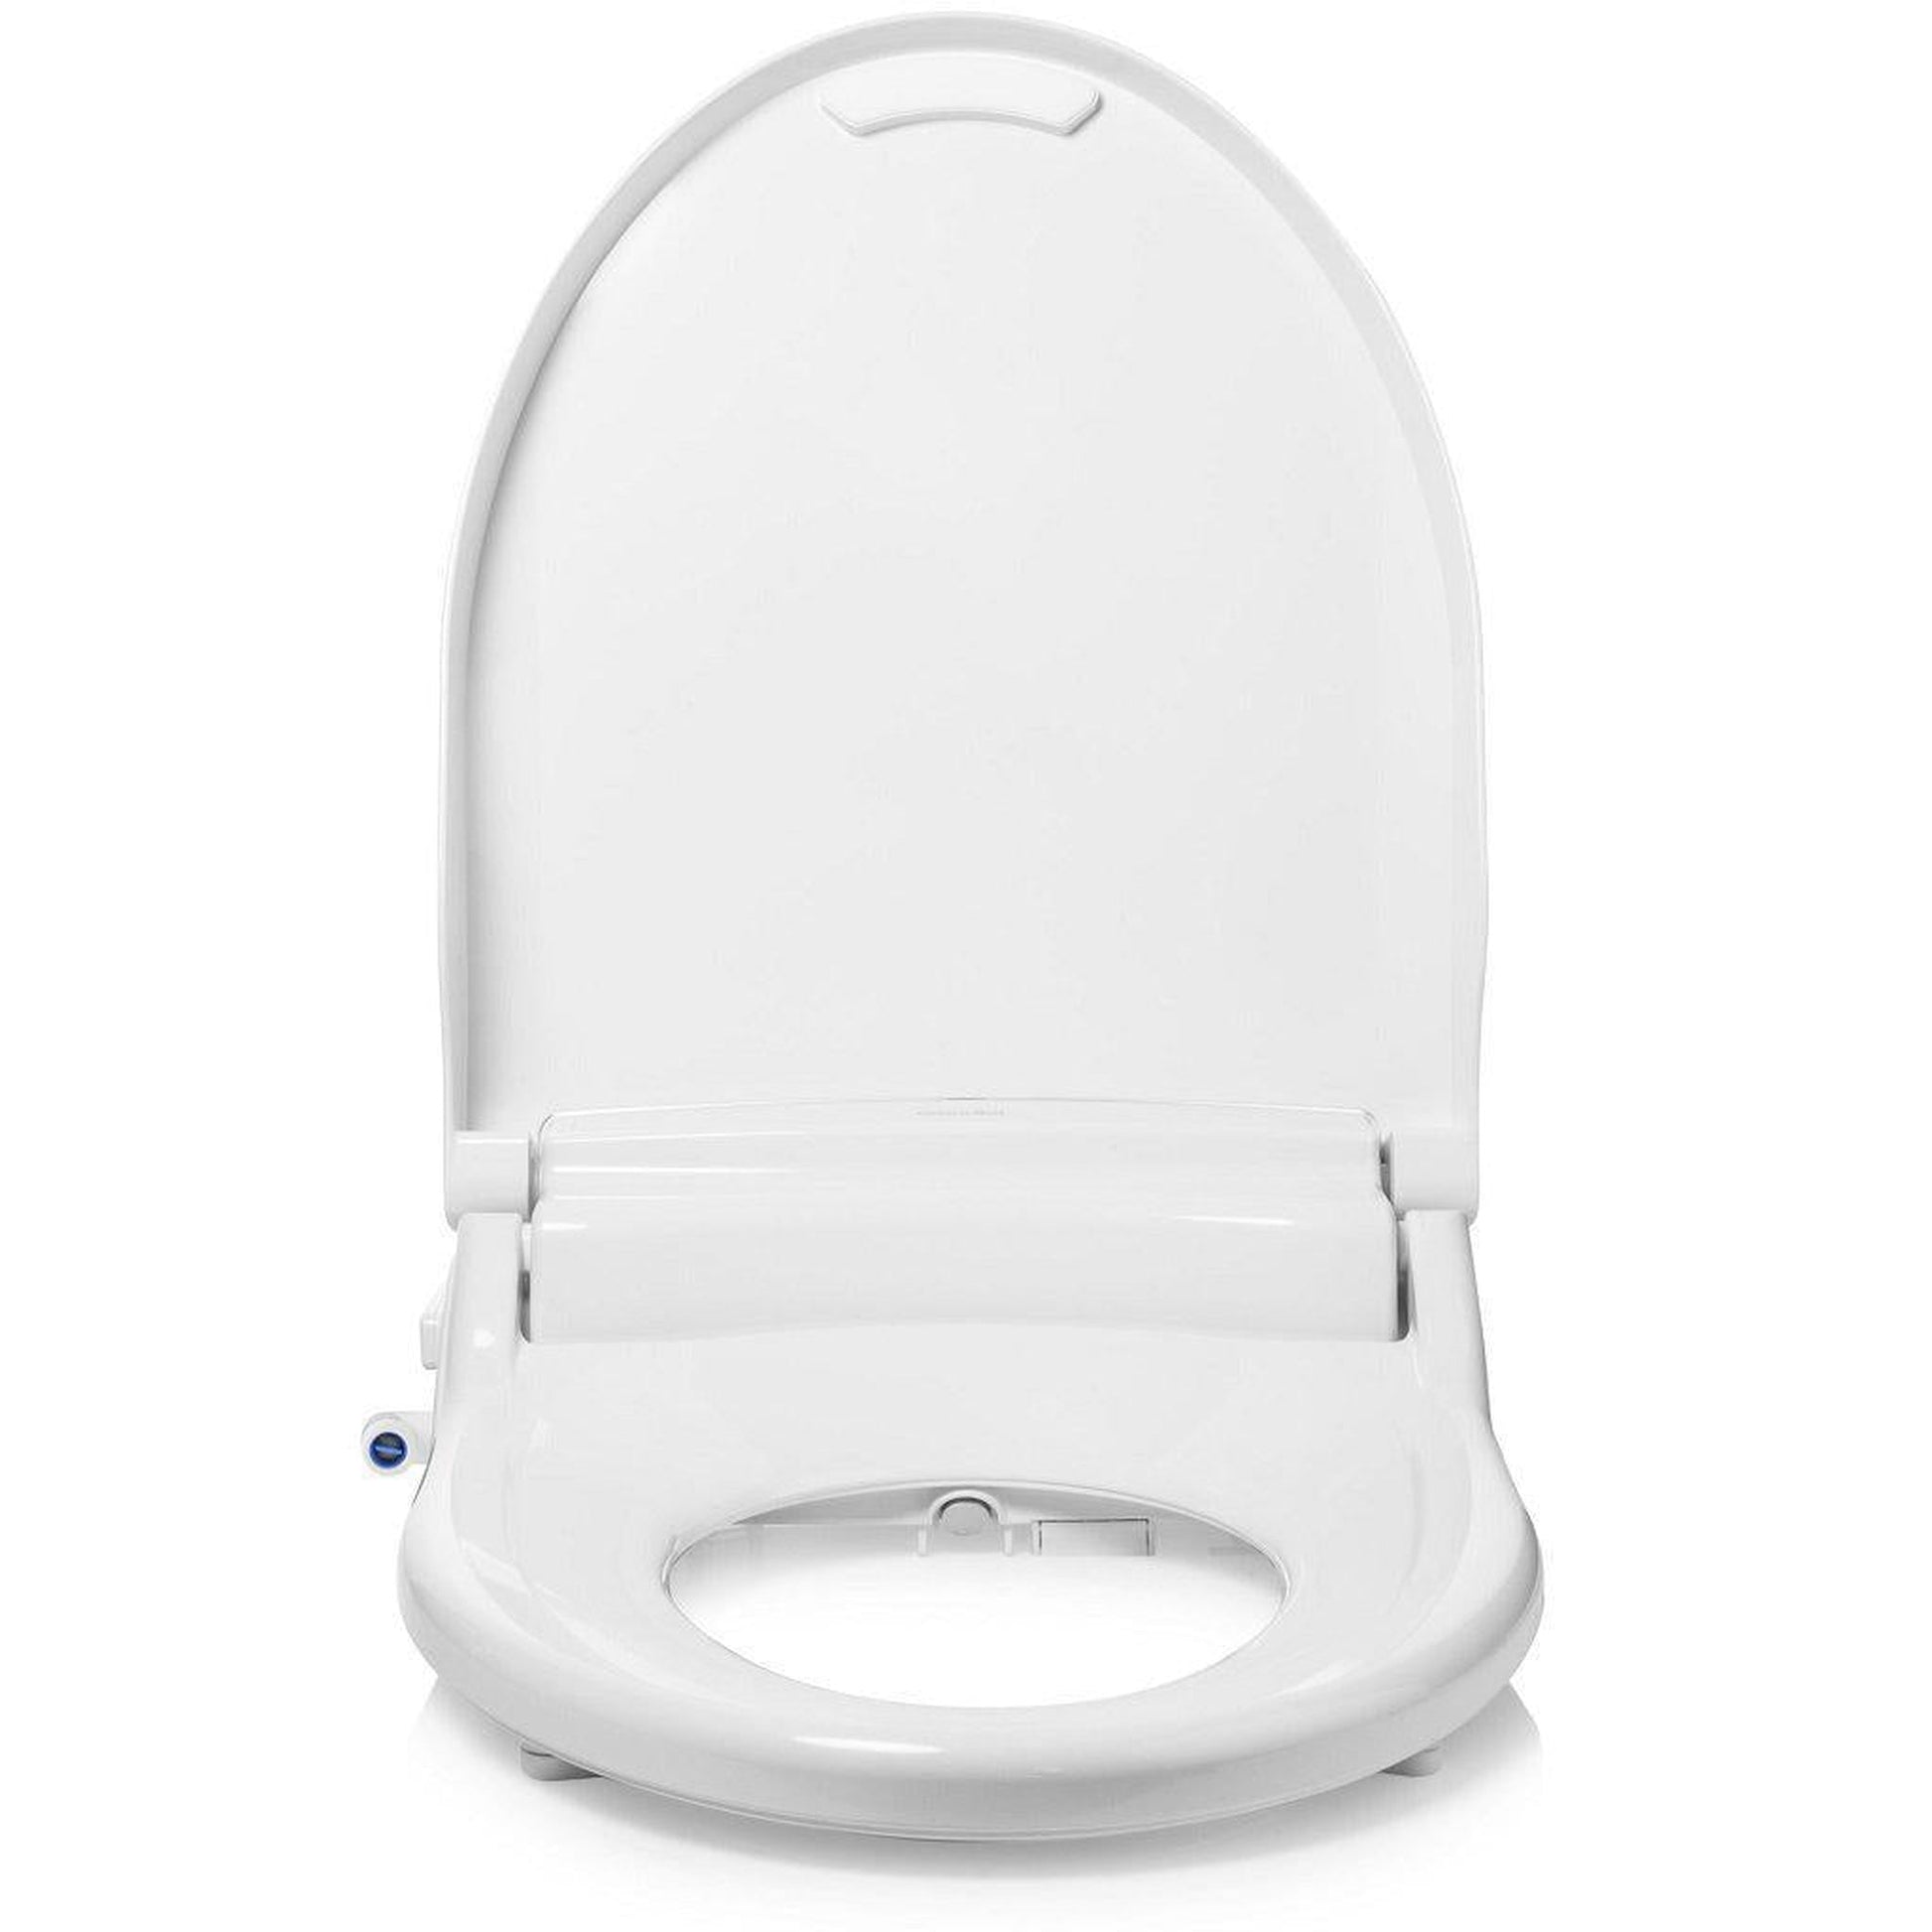 Brondell Swash Select DR802 19.5" White Round Electric Luxury Bidet Toilet Seat With Wireless Remote Control